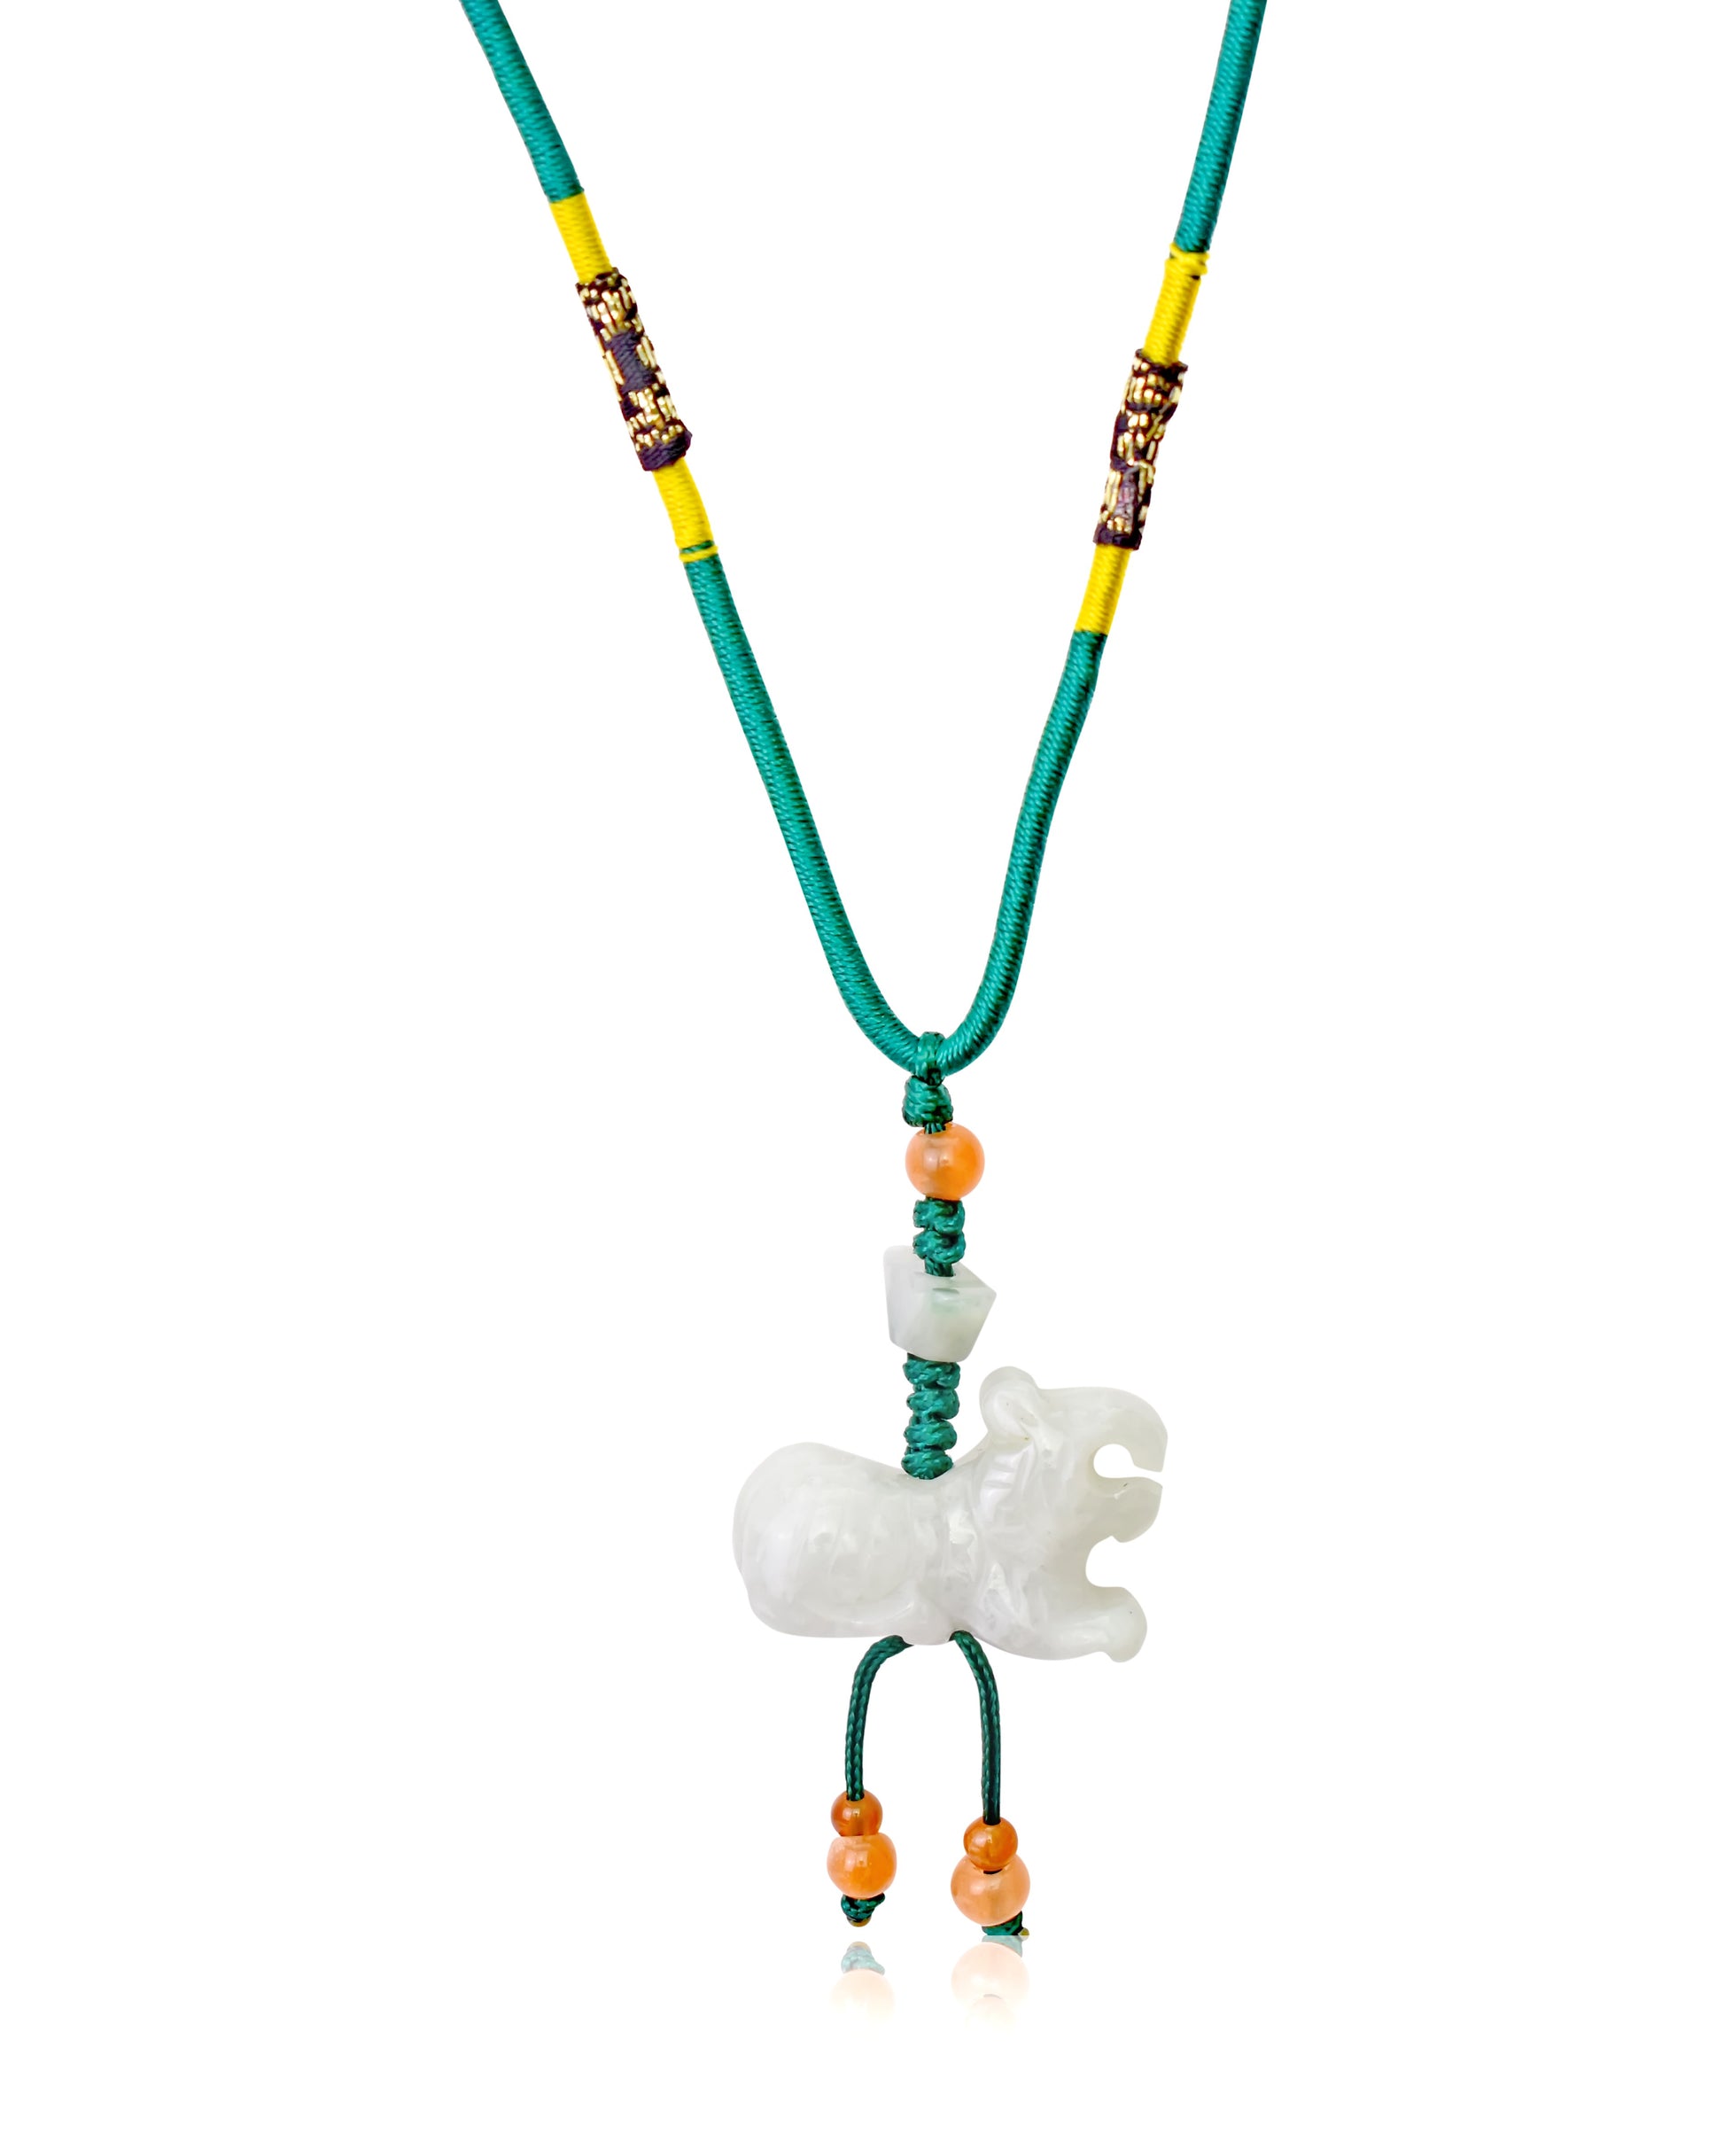 Shine with Confidence with the Tiger Chinese Zodiac Necklace made with Green Cord